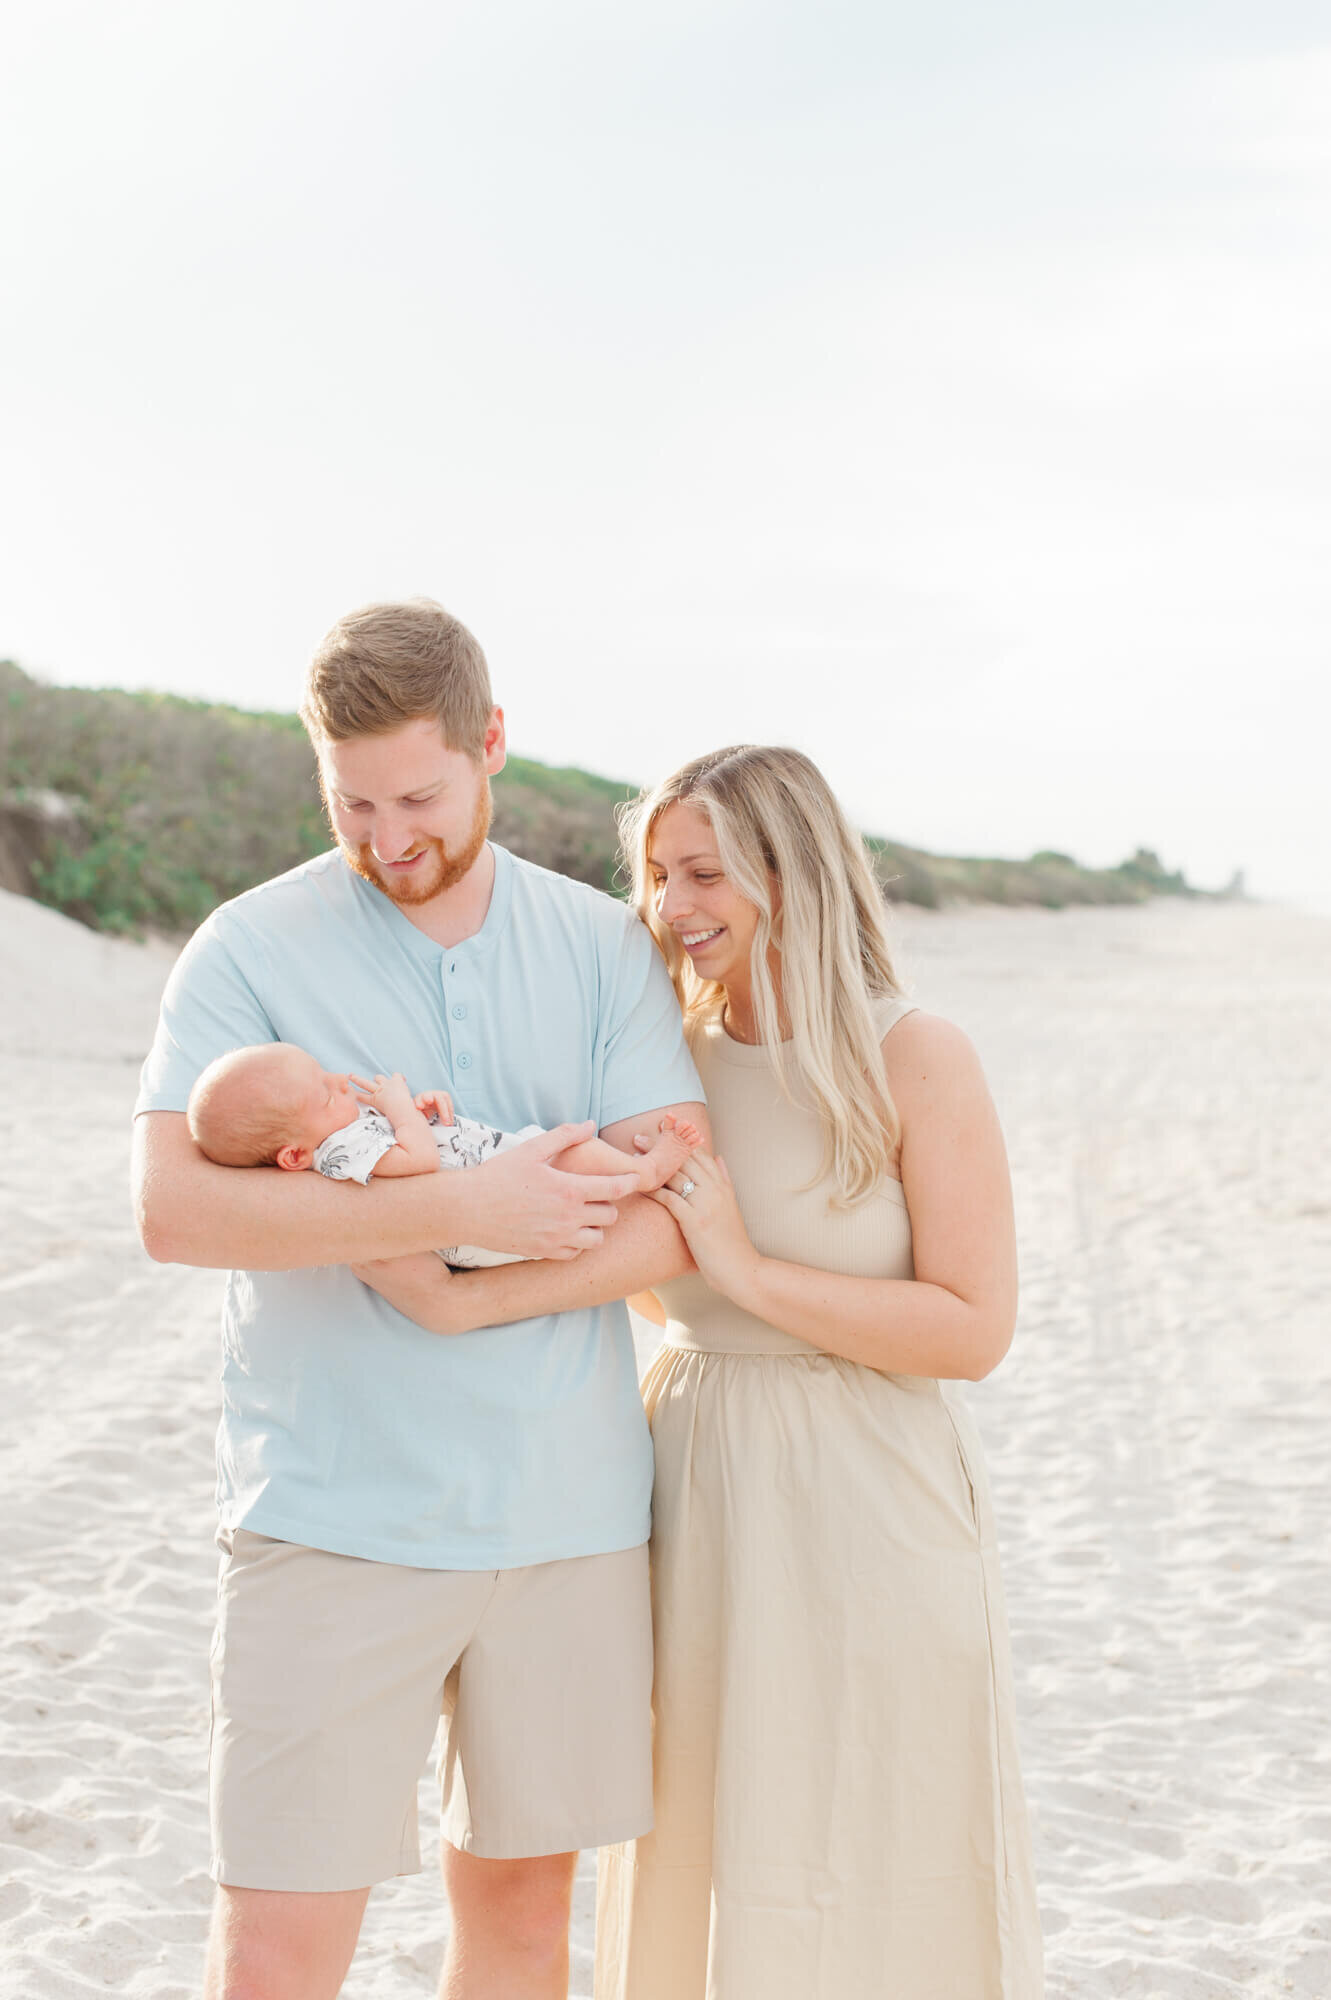 New family stands on Melbourne Beach holding their sweet newborn baby boy during sunset